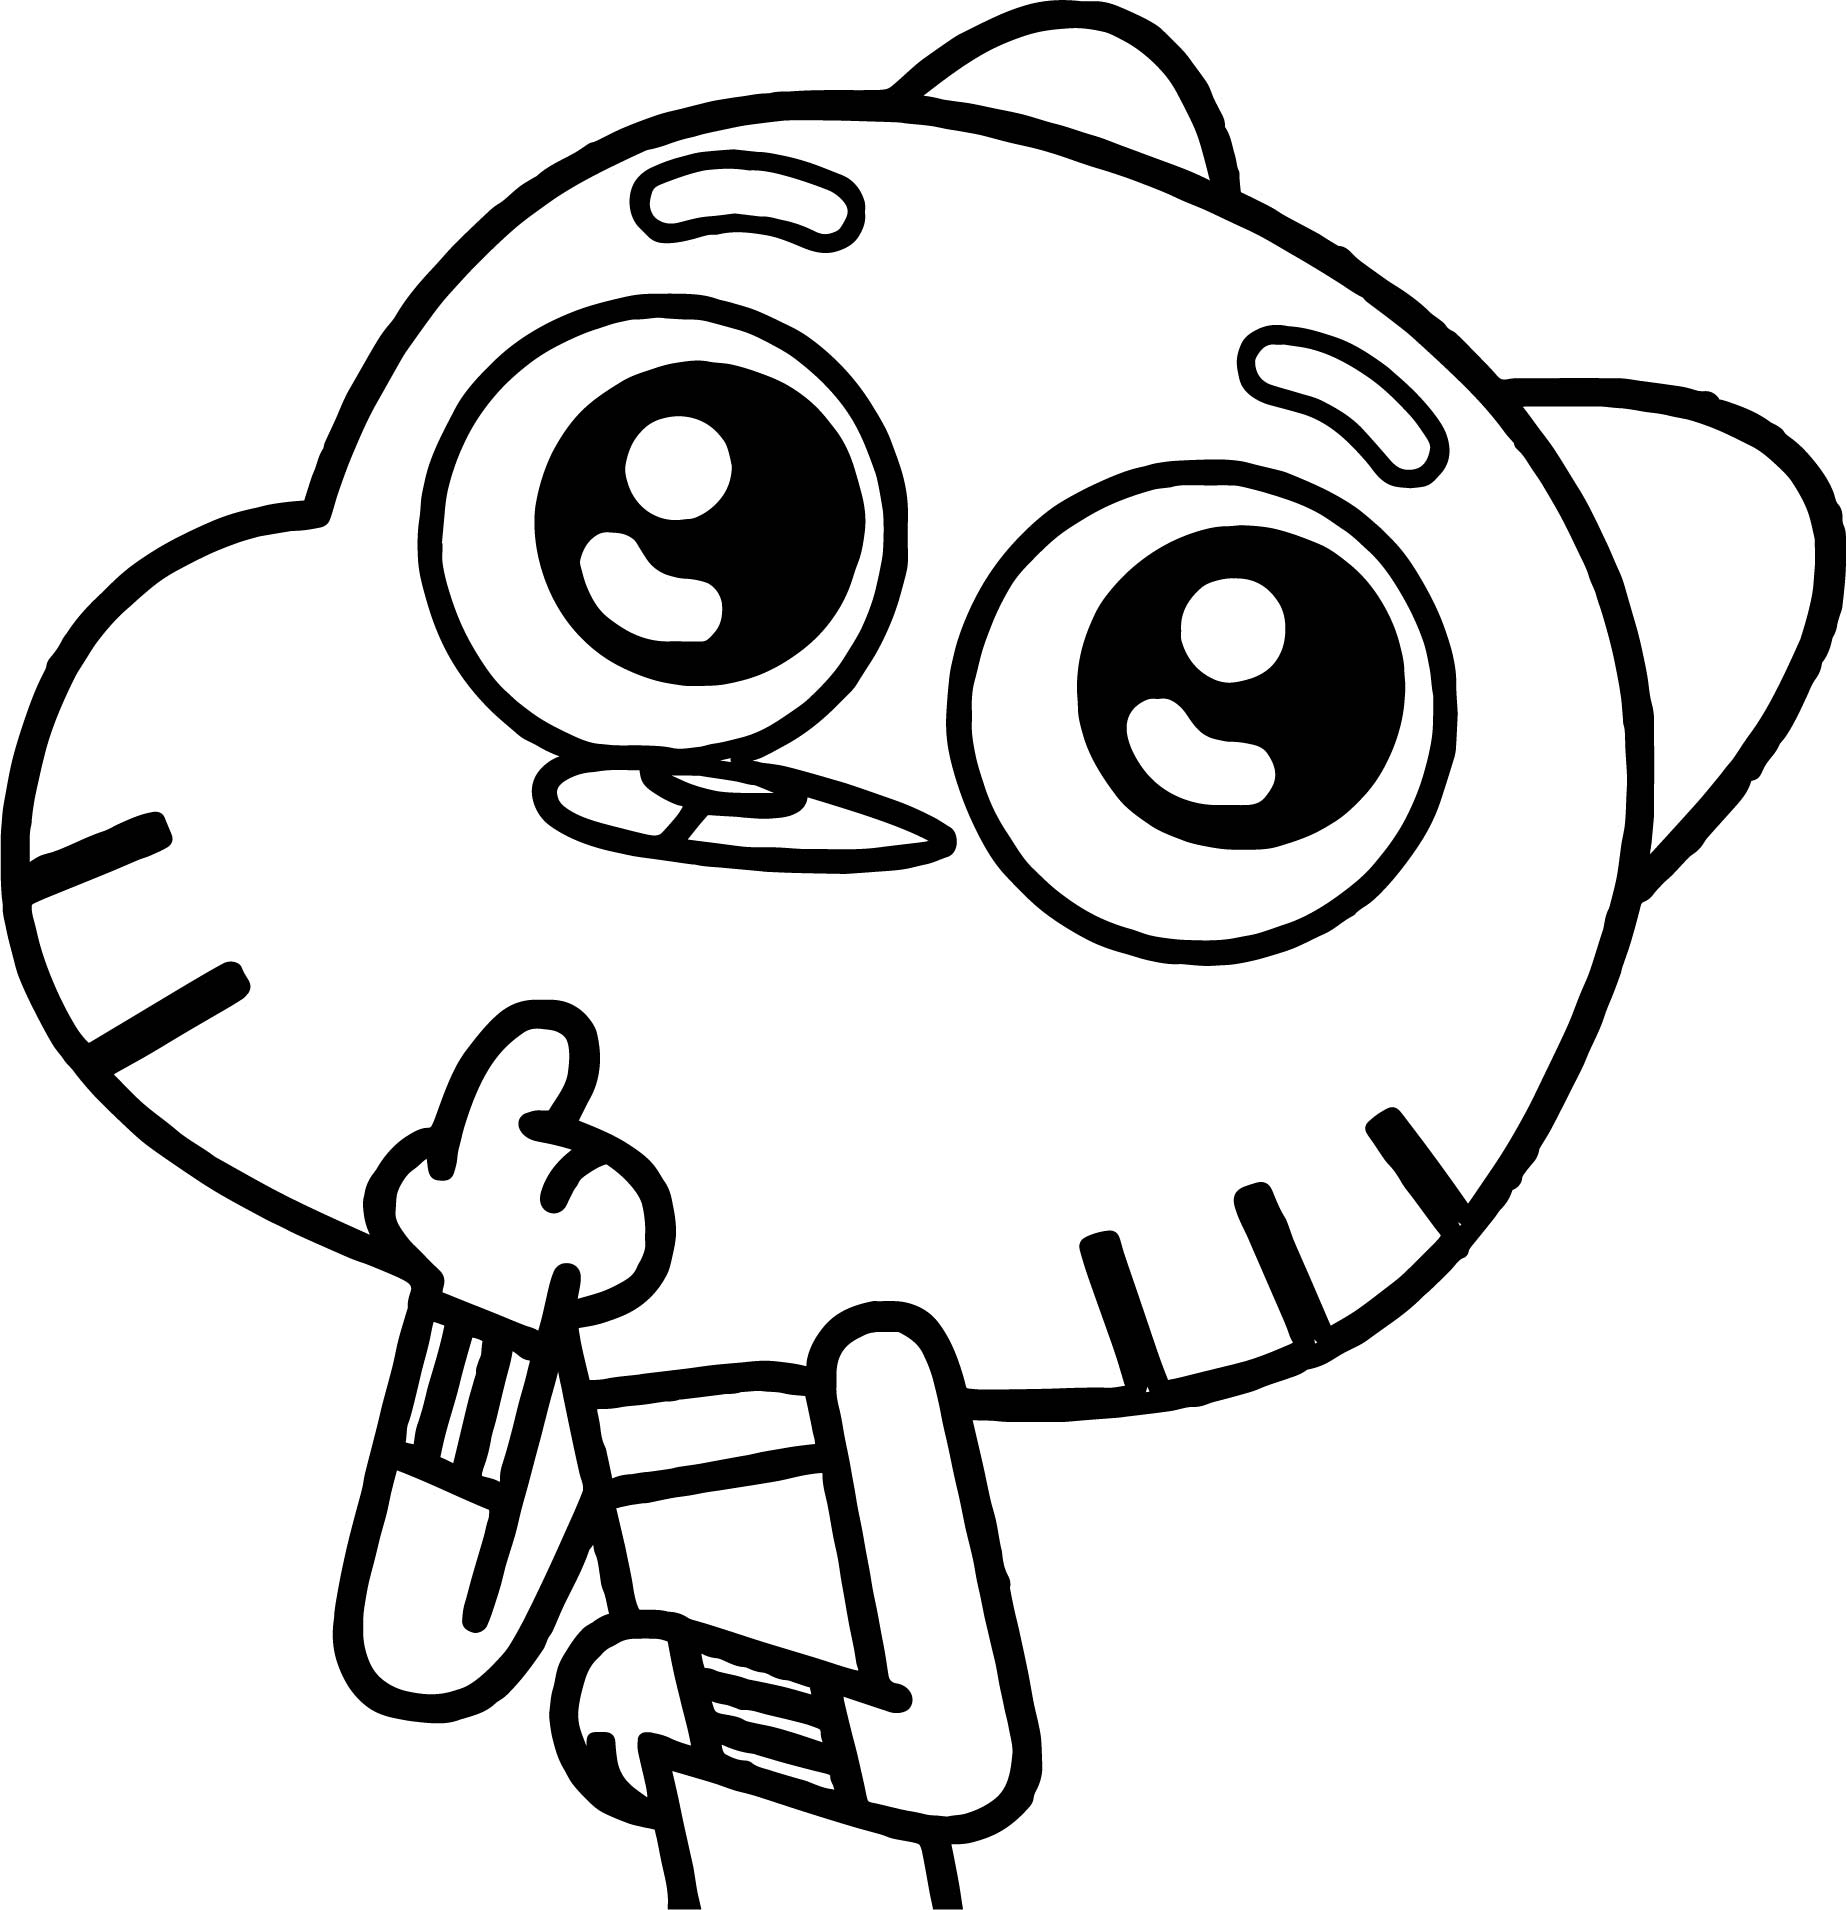 Gumball With Cute Eyes Coloring Page